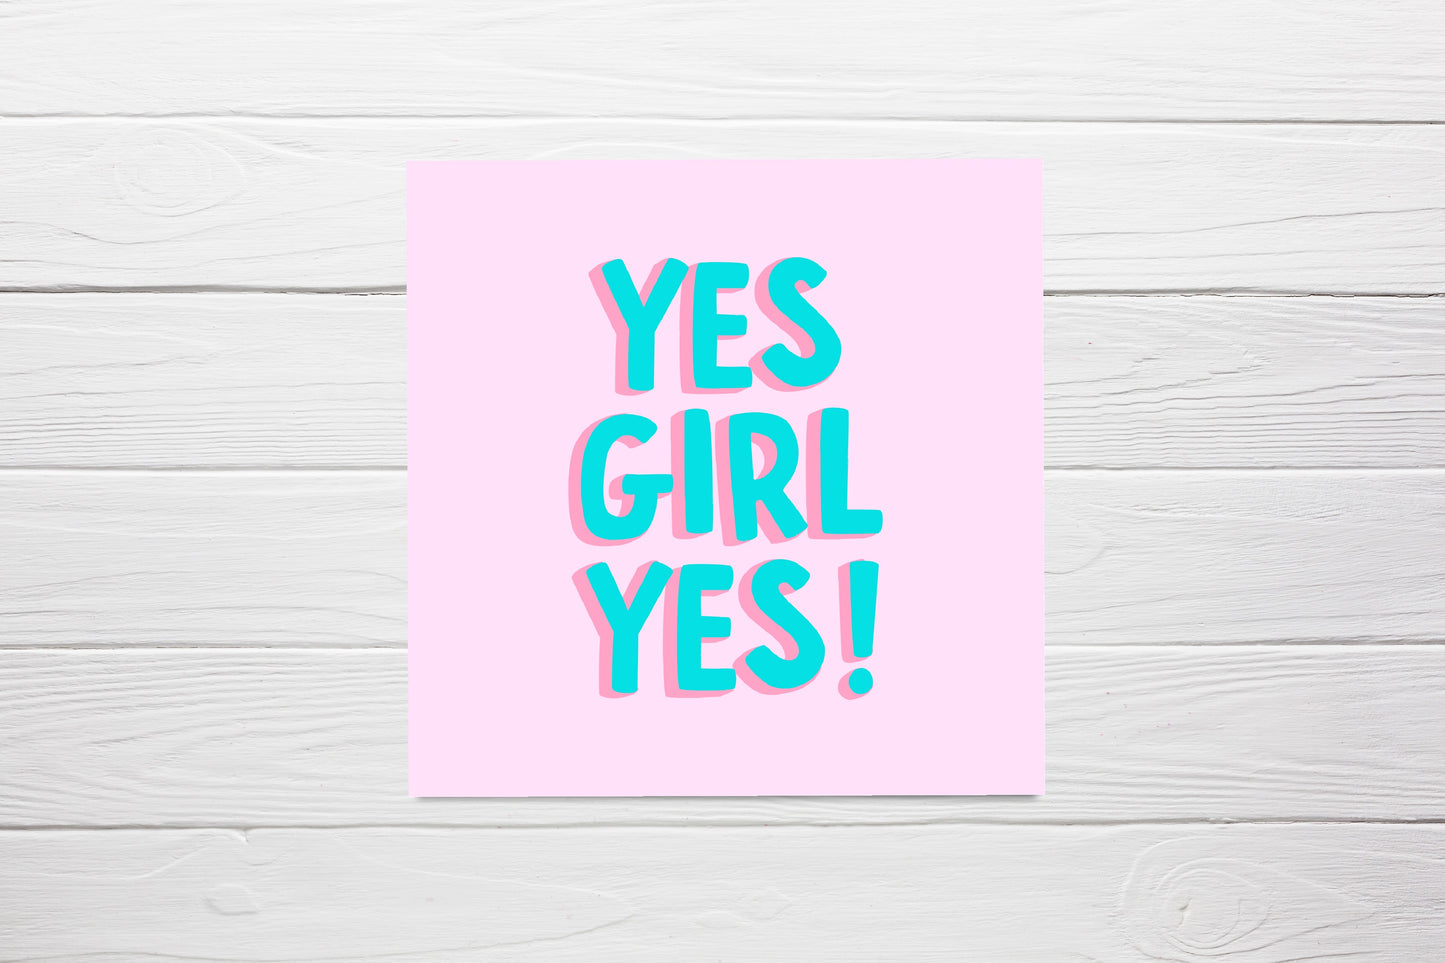 Friend Card | Yes Girls Yes | Congratulations Card | Well Done Card